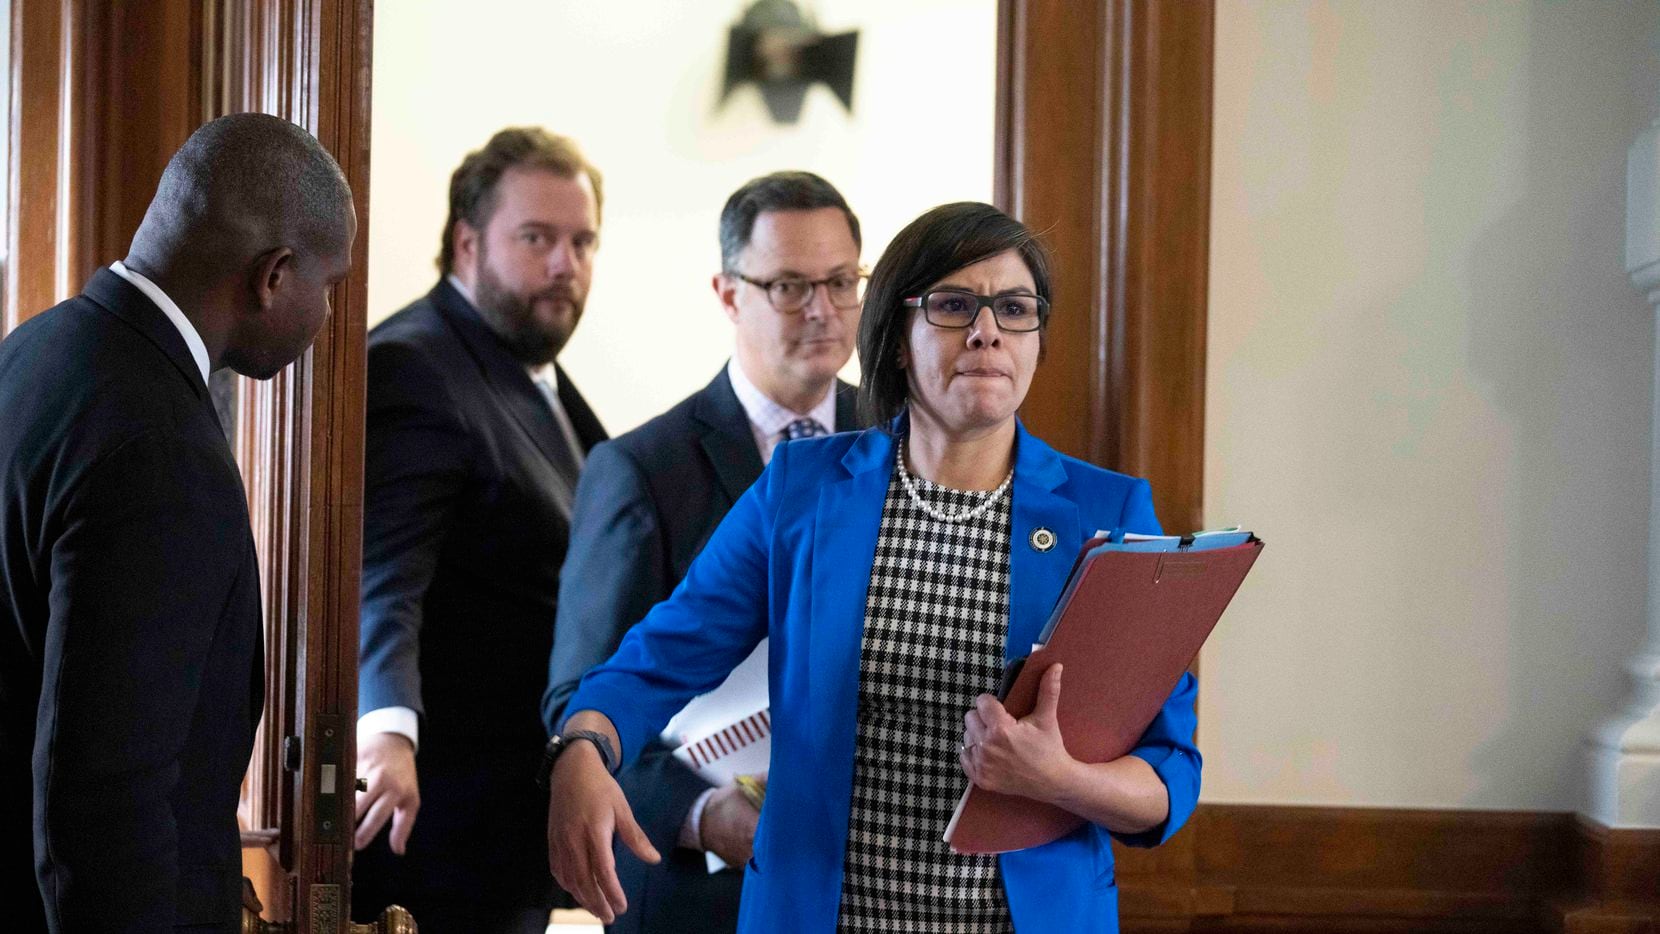 State Reps. John Bucy, D-Austin, Rafael Anchia, D-Dallas, and jessica Gonzalez, D-Dallas, leave a Democratic caucus meeting with the House Speaker Dade Phelan during negotiations on SB 7 the election reform bill on May 30, 2021. 